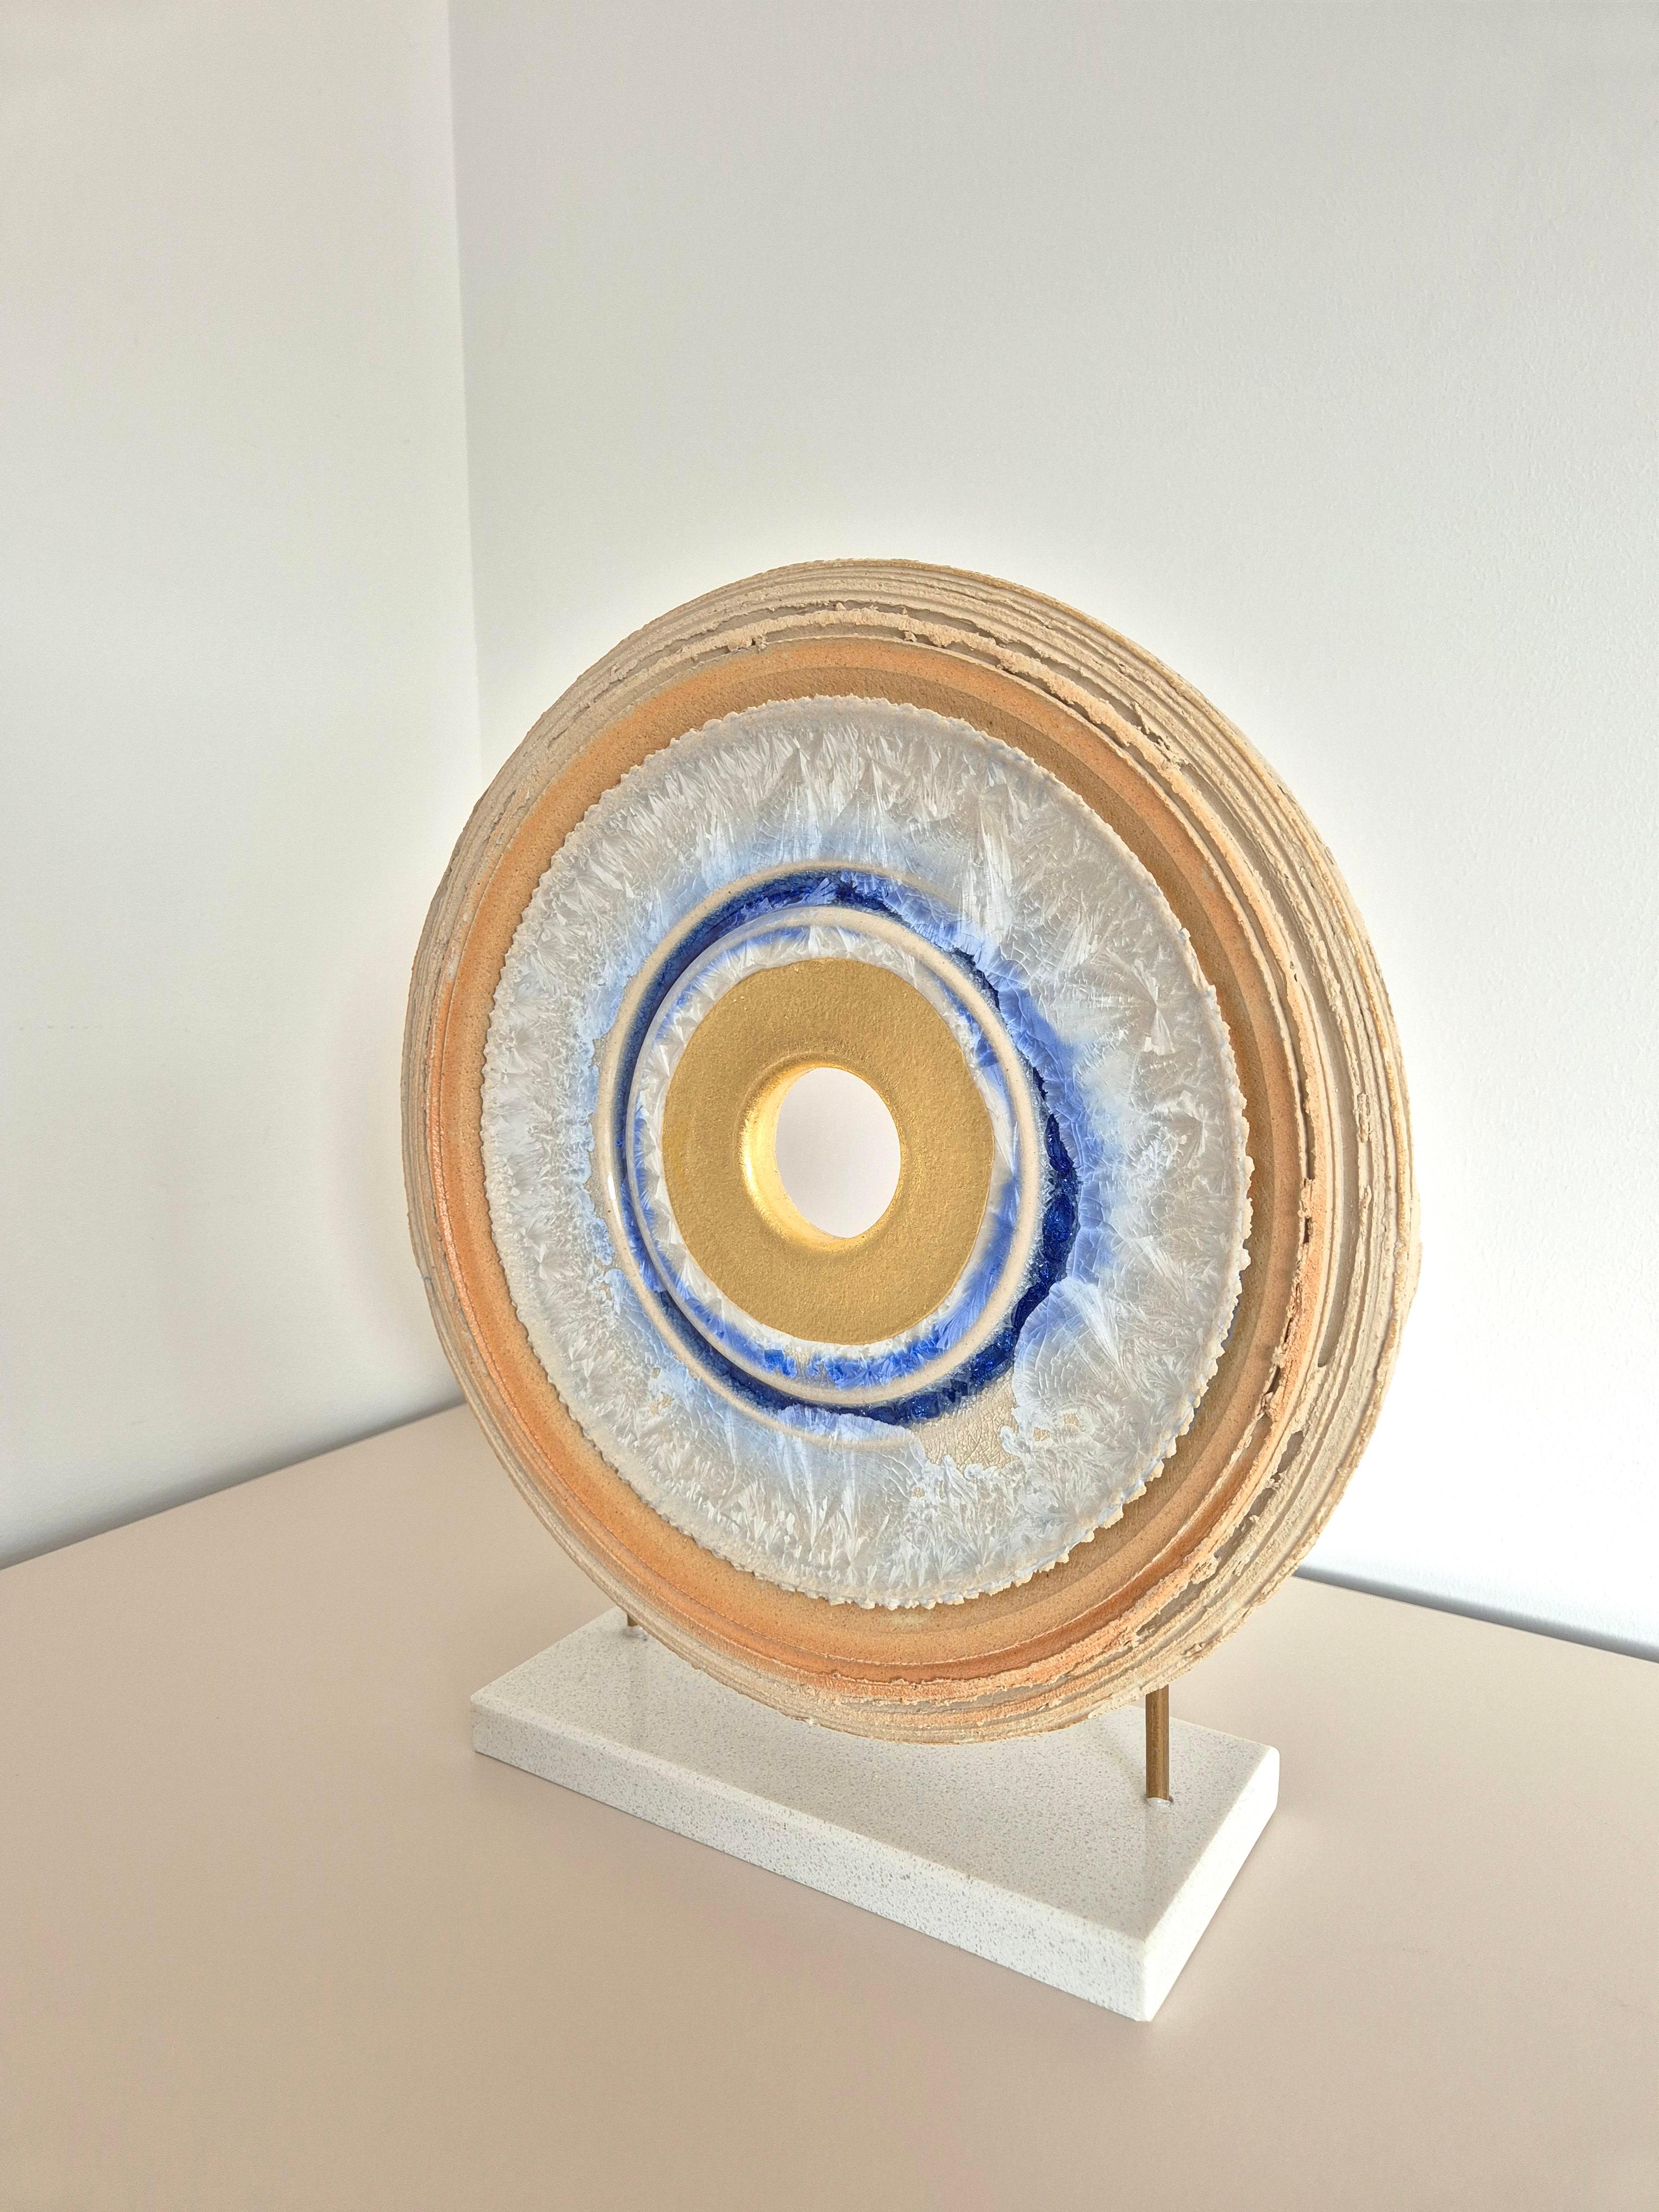 Creatio Continua Ice by Kuno Vollet - gold, blue circular ceramic sculpture For Sale 3